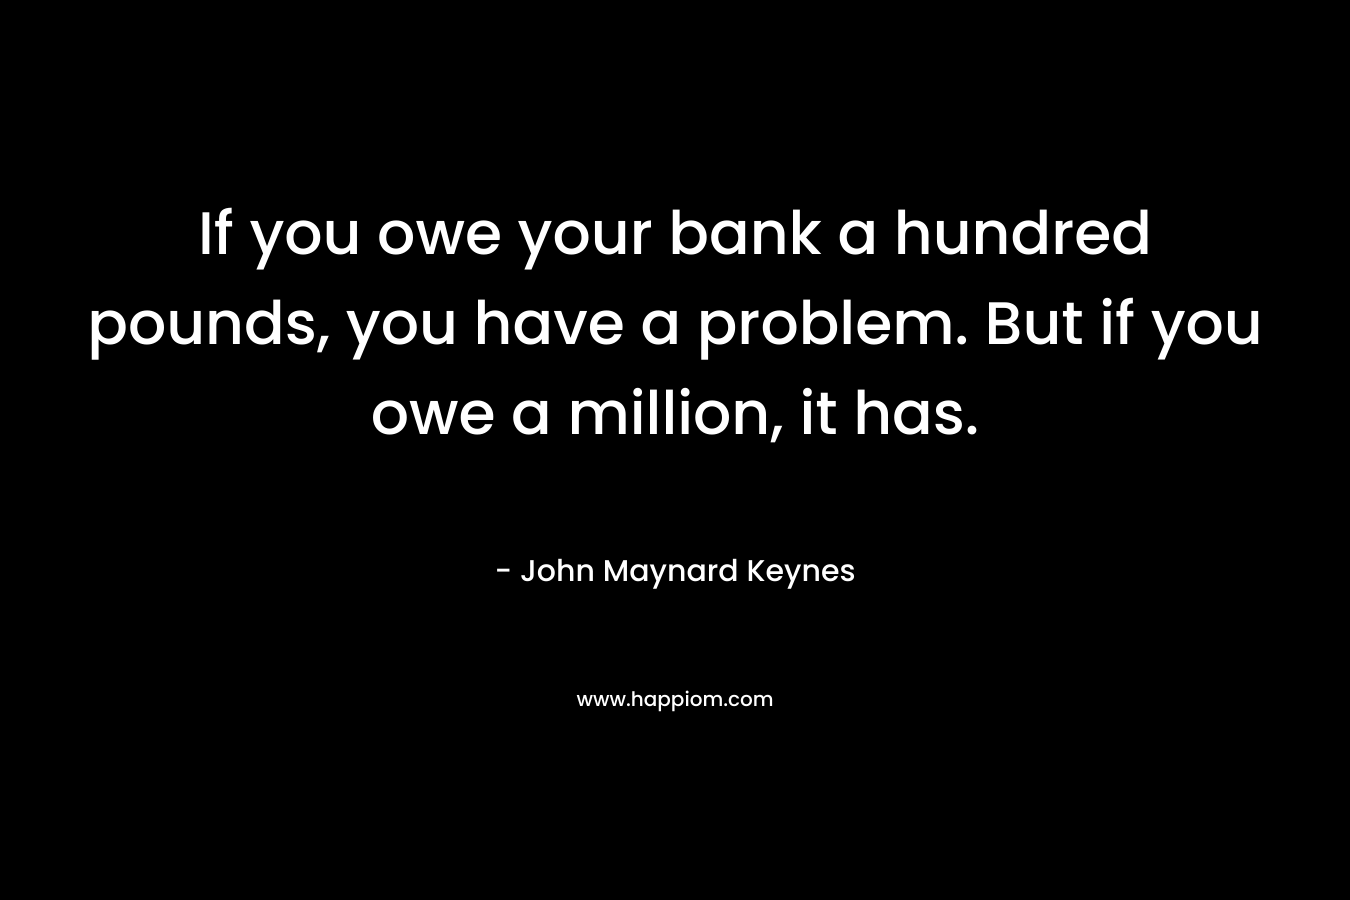 If you owe your bank a hundred pounds, you have a problem. But if you owe a million, it has. – John Maynard Keynes